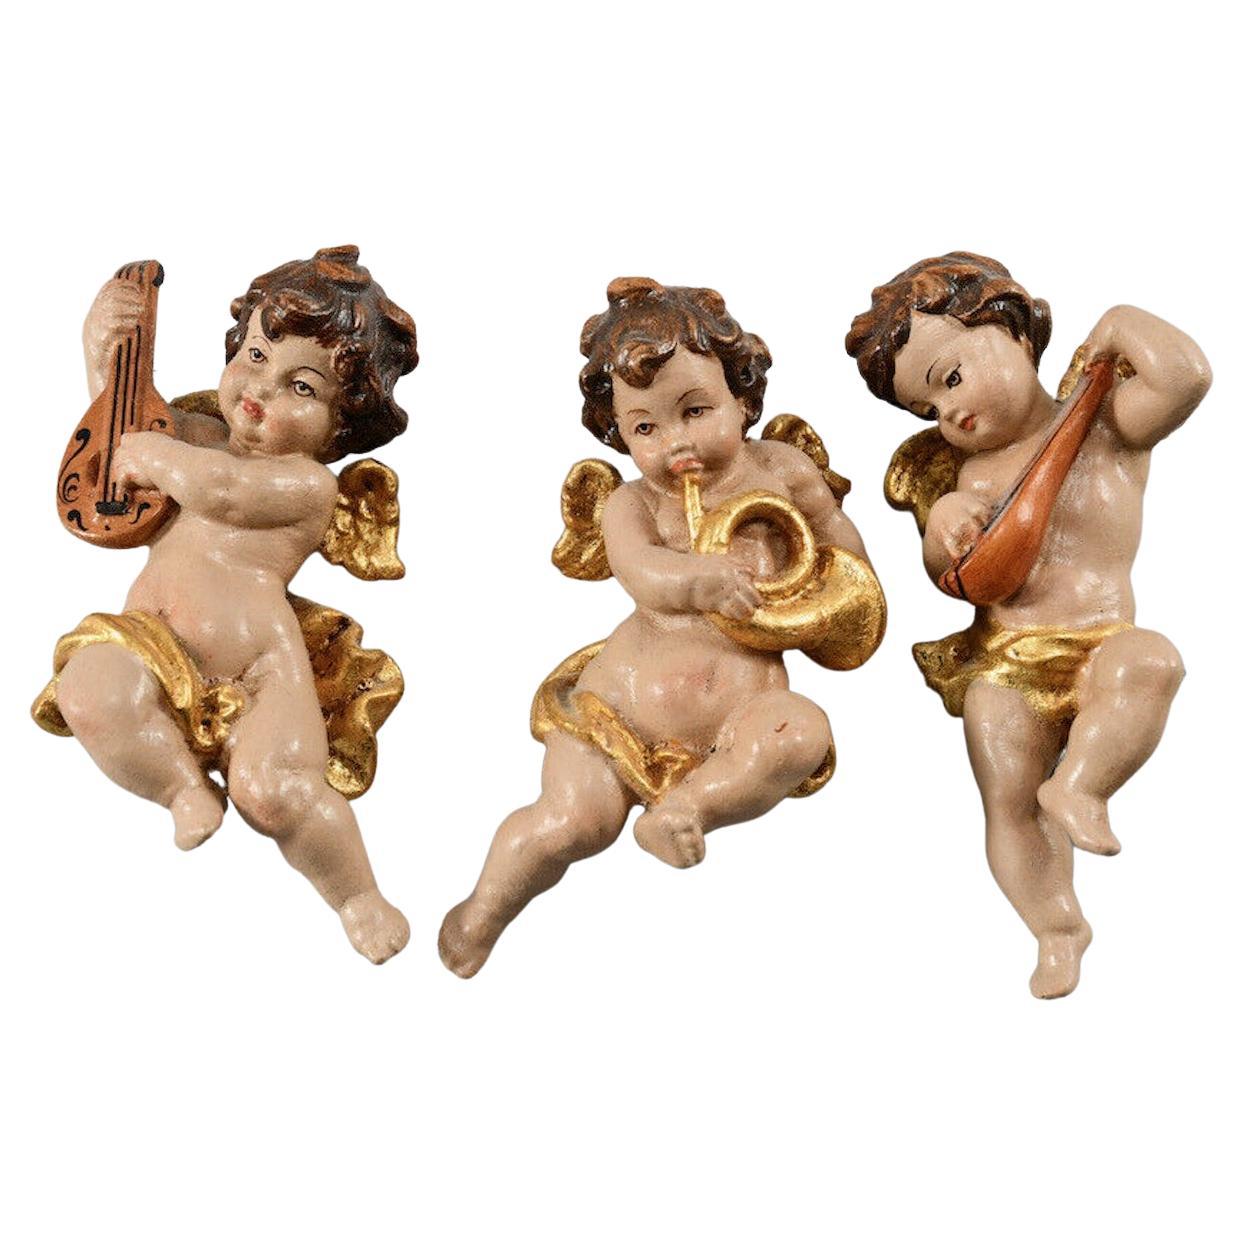 A set of three beautiful petite hand carved cherub angels, found at an estate sale in Verona Italy. Made by a woodcarver in the South Tyrollean Area in Italy, this area is well-known for their wood carvings. The size given in the dimensions section